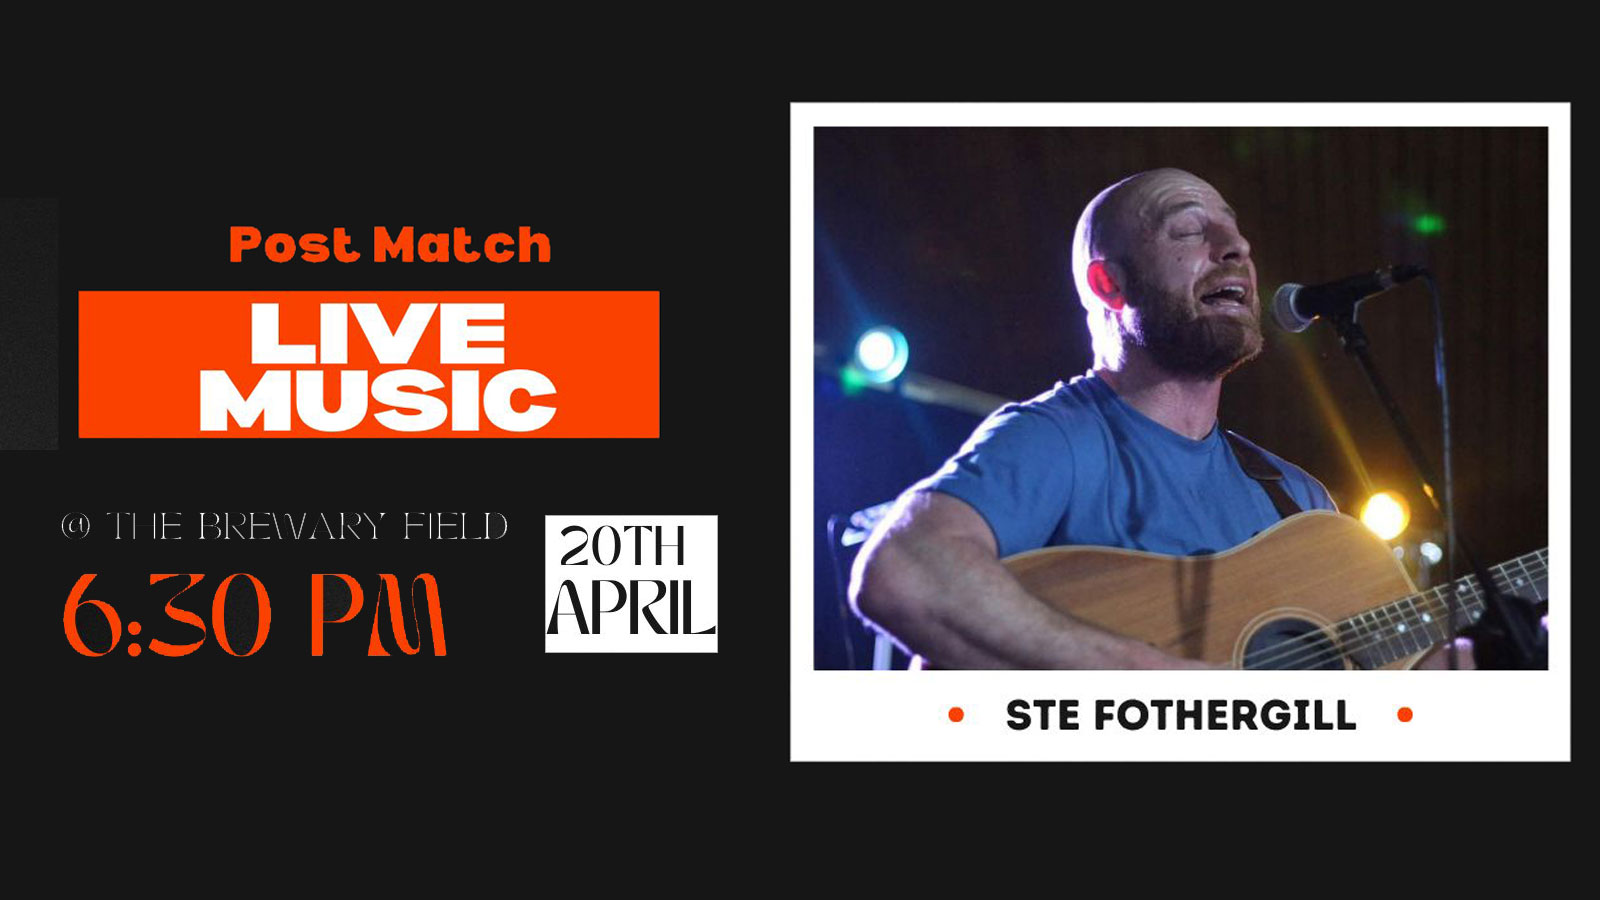 Live music from Ste Fothergill at Spennymoor Town